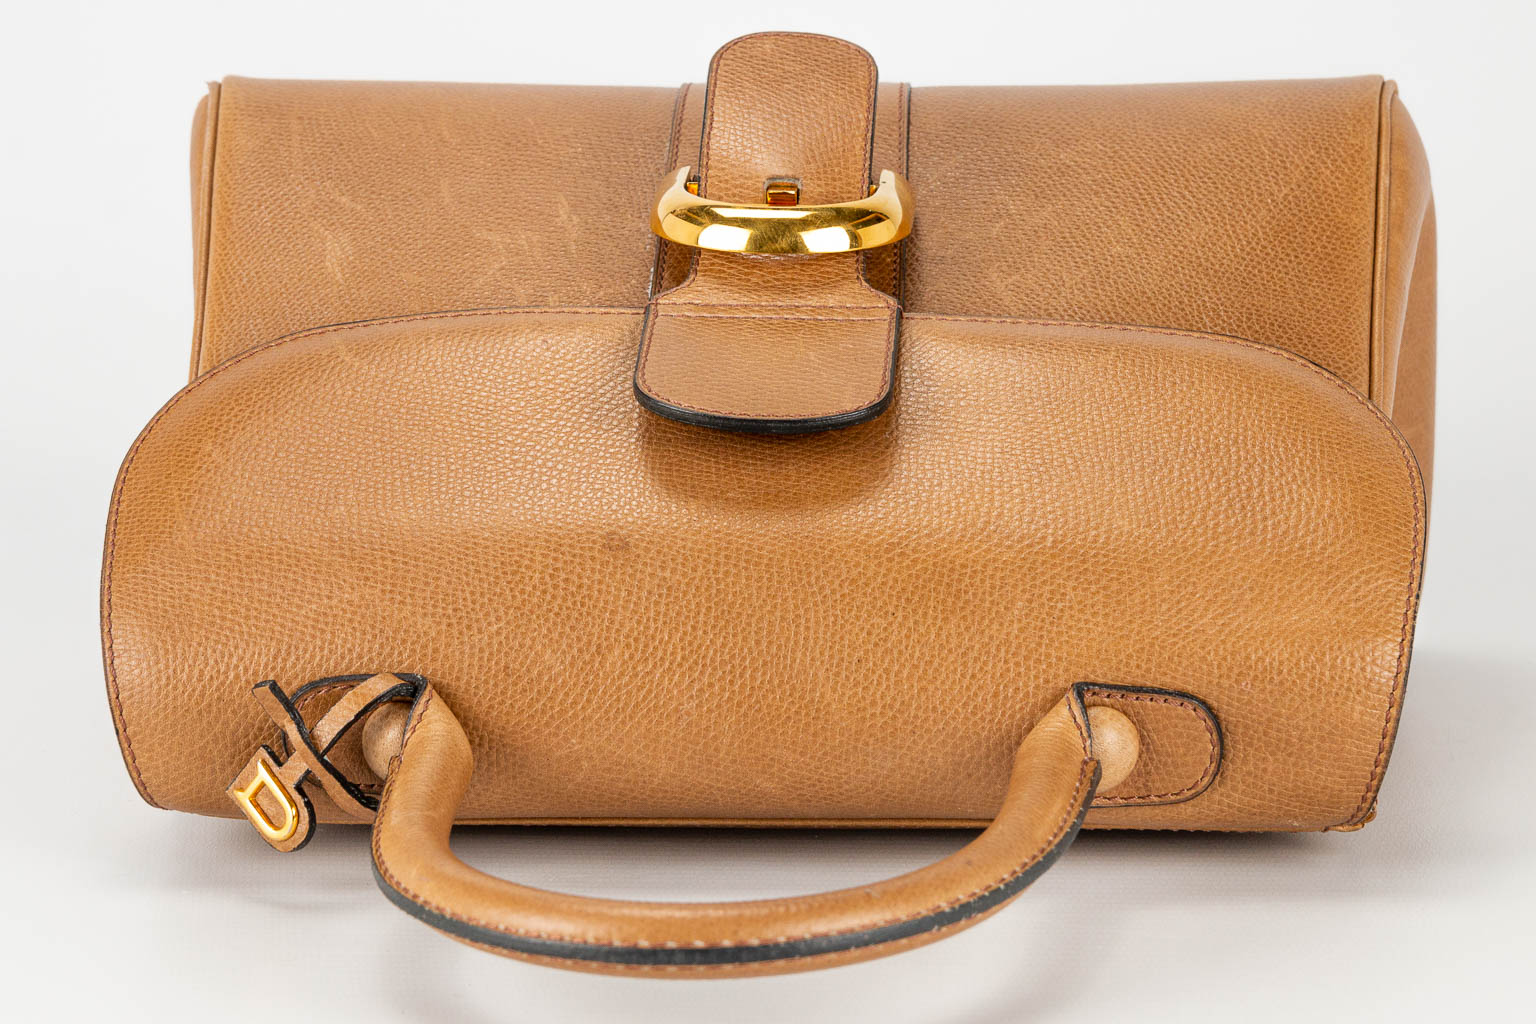 A purse made of brown leather and marked Delvaux, model Brilliant.